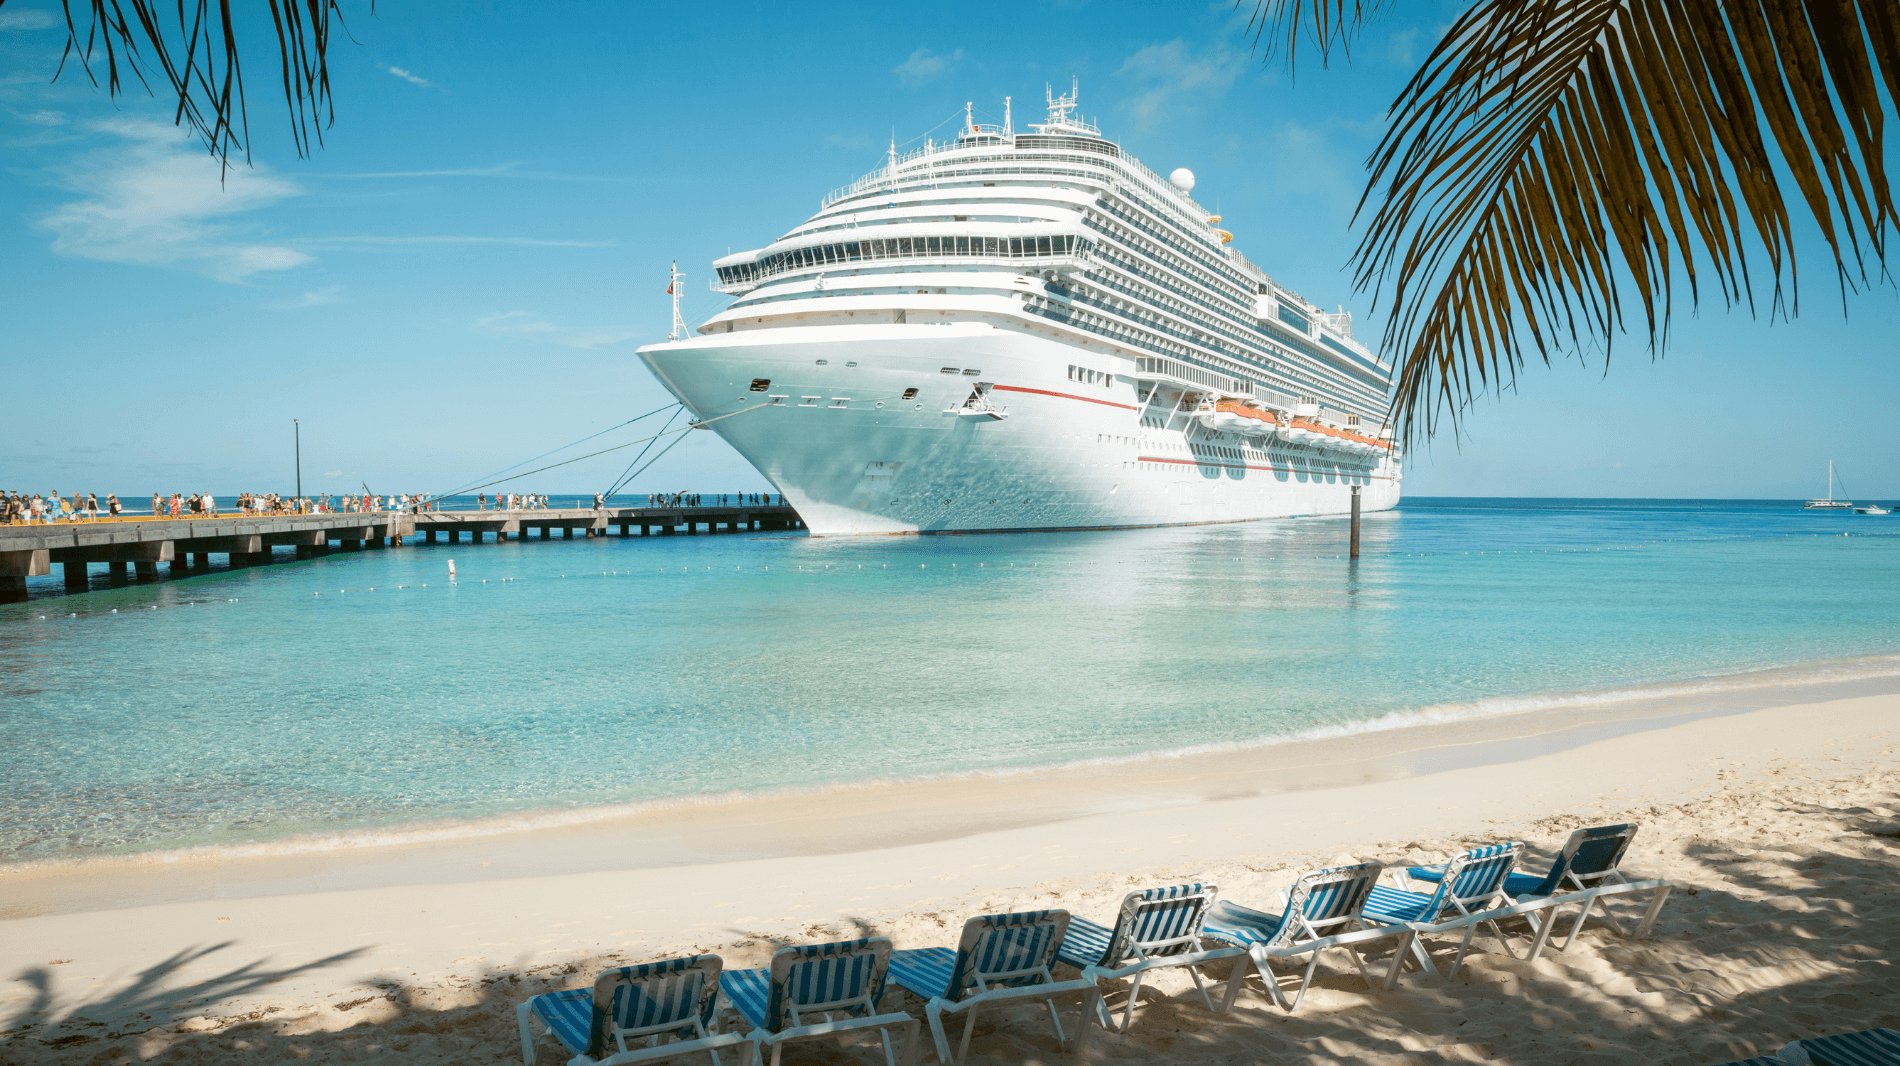 Work on a cruise for free travel